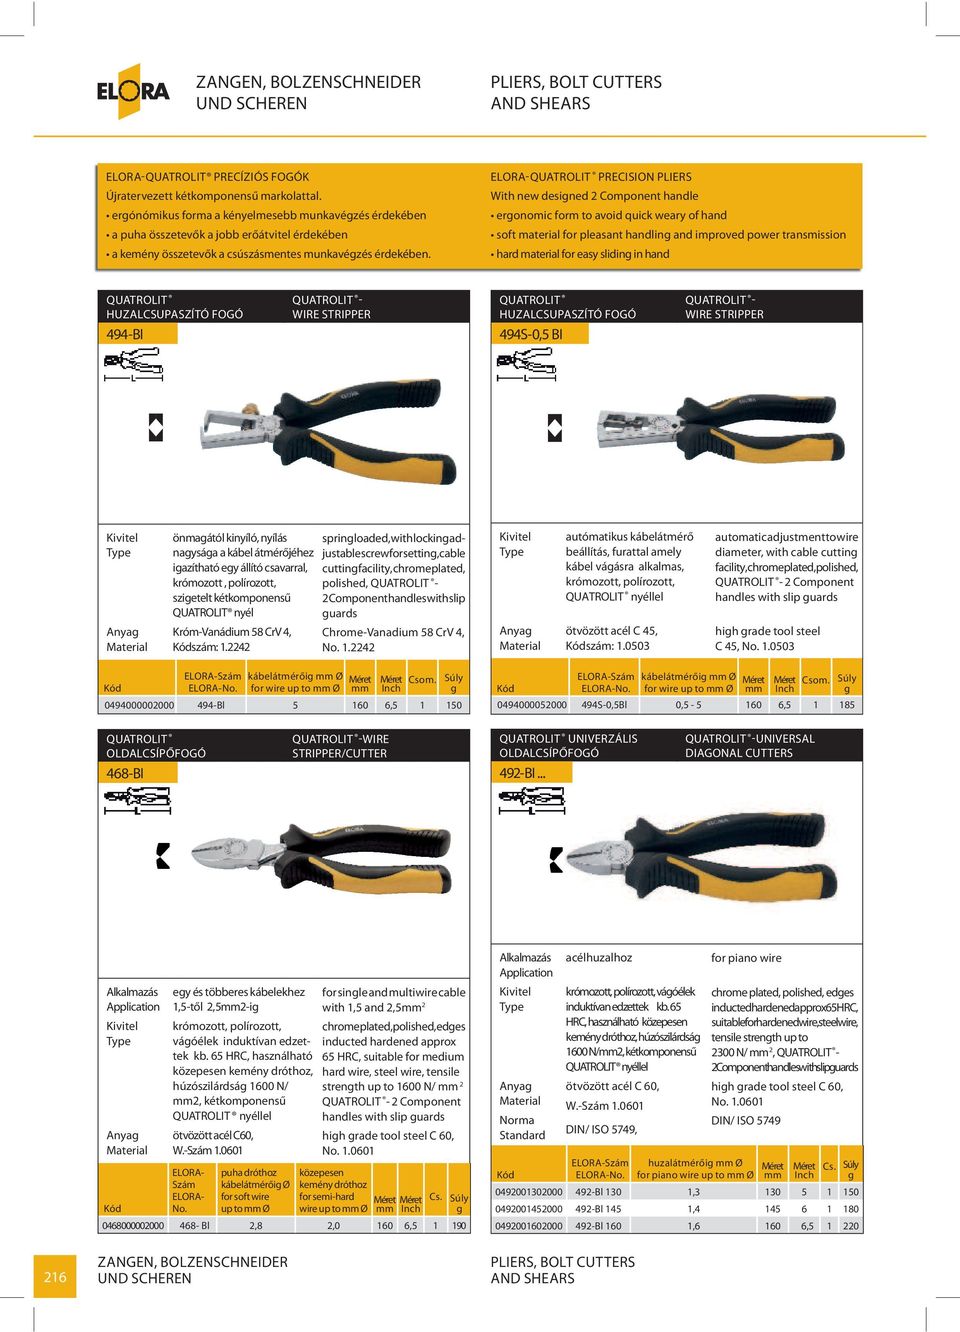 ELORA- PRECIION PLIER With new deined 2 Component handle eronomic form to avoid quick weary of hand oft material for pleaant handlin and improved power tranmiion hard material for eay lidin in hand